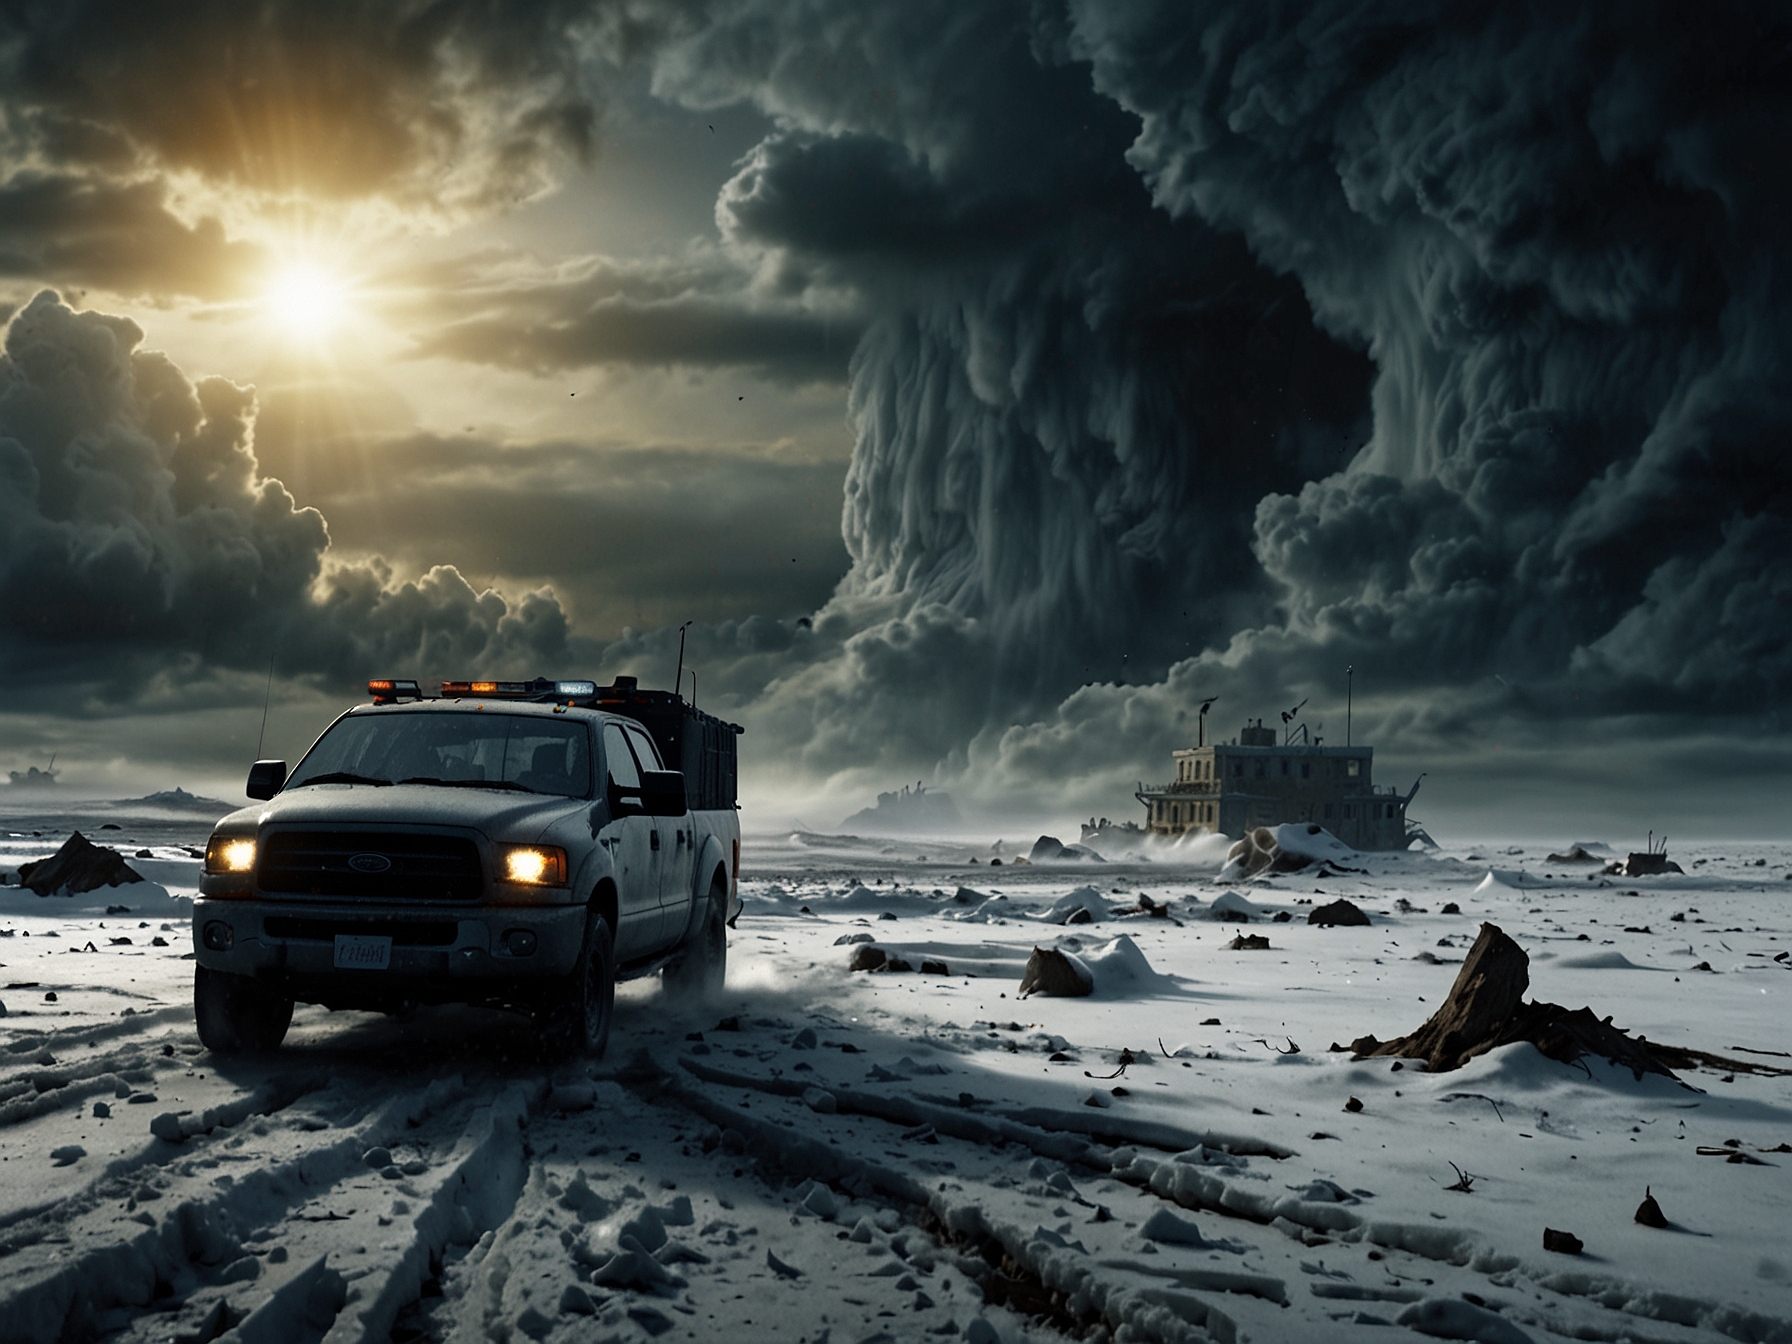 Image showing a dramatic scene from 'The Day After Tomorrow,' with characters facing extreme weather events, highlighting the film's depiction of climate change consequences.